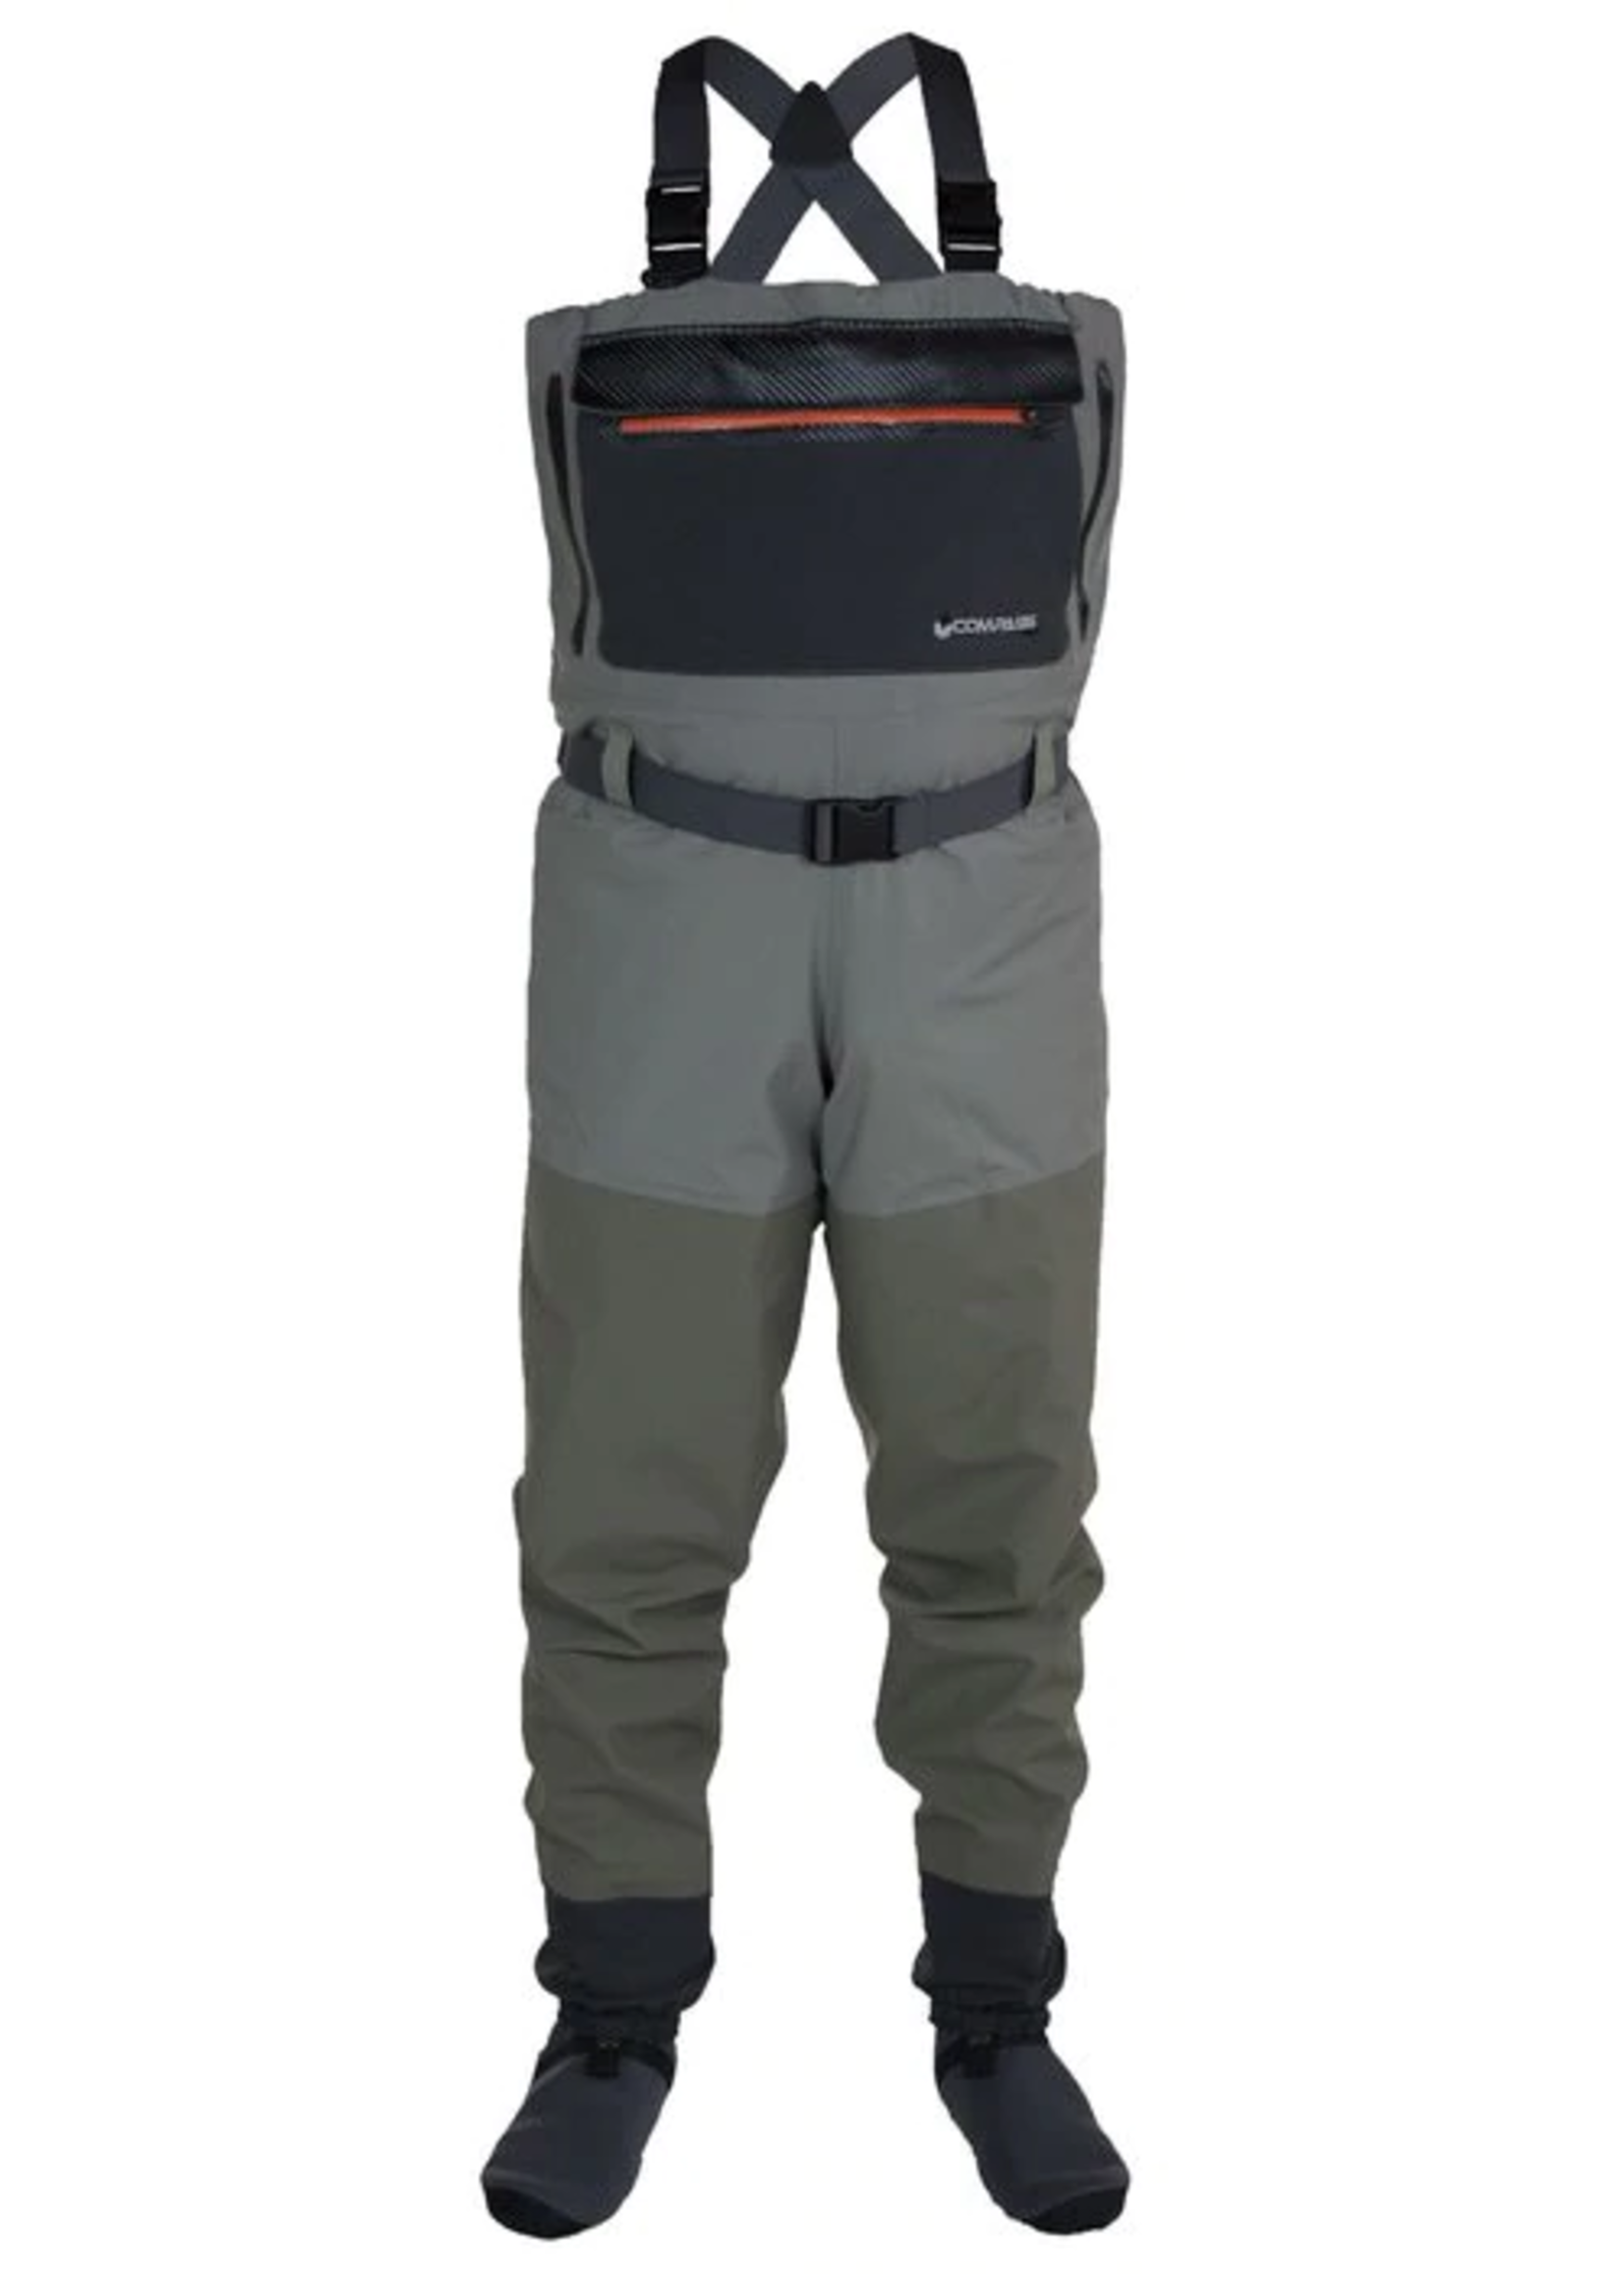 Compass 360 Compass 360 Tailwater Breathable Stockingfoot Wader